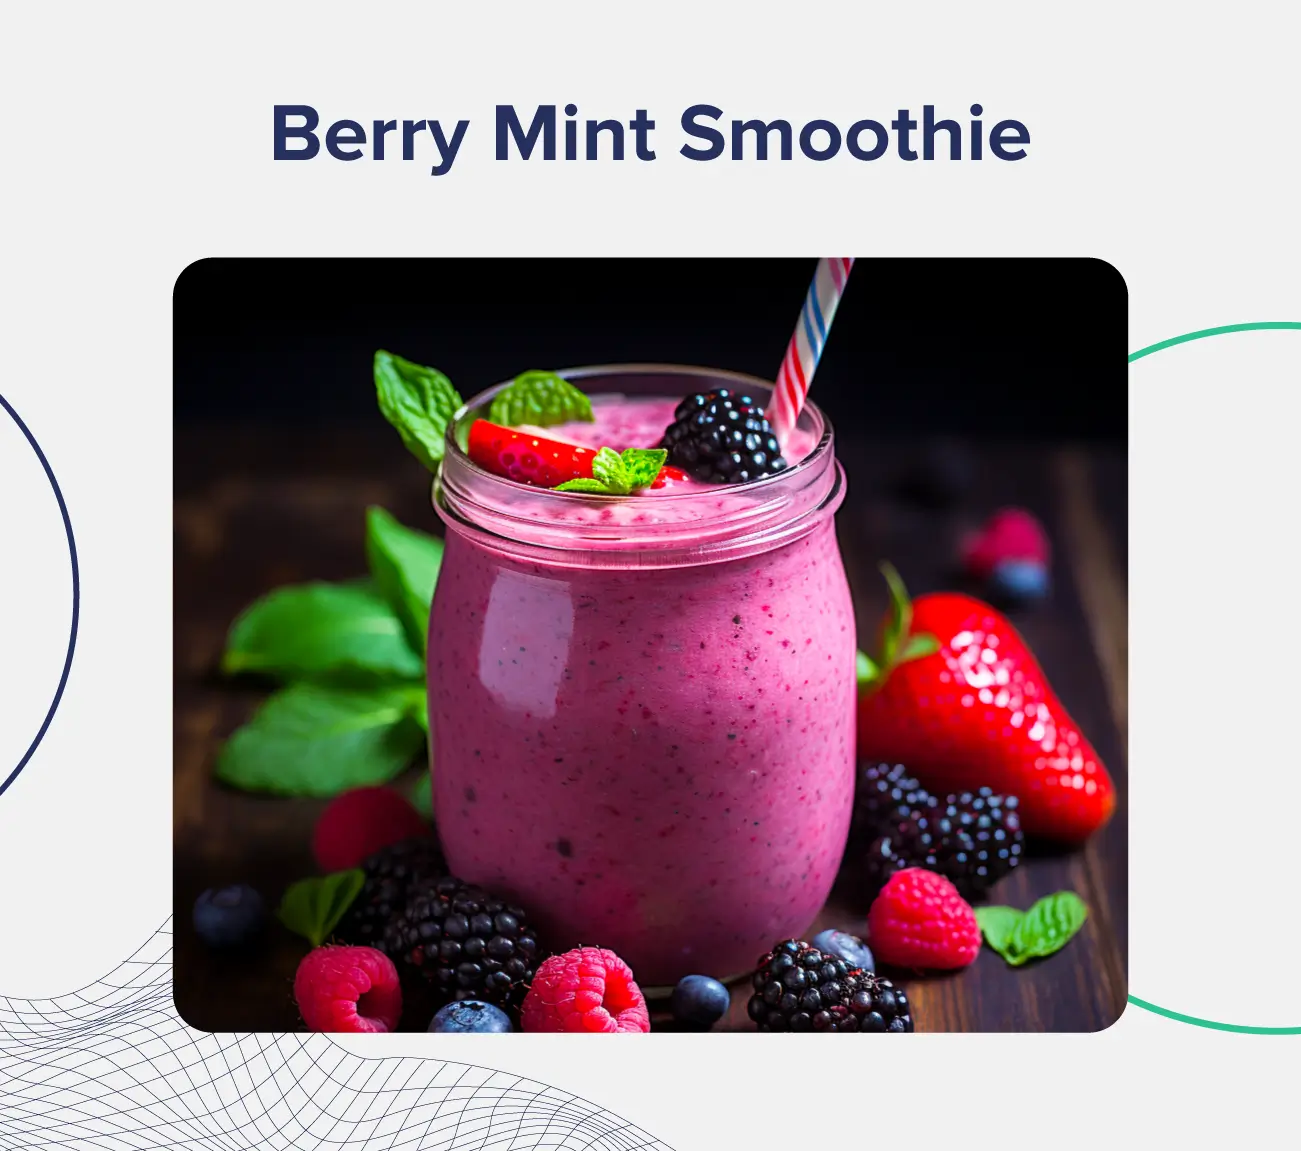 A graphic entitled "Berry Mint Smoothie," depicting a glass jar filled with a purple fruit smoothie and garnished with a strawberry, a blackberry, and some mint leaves.